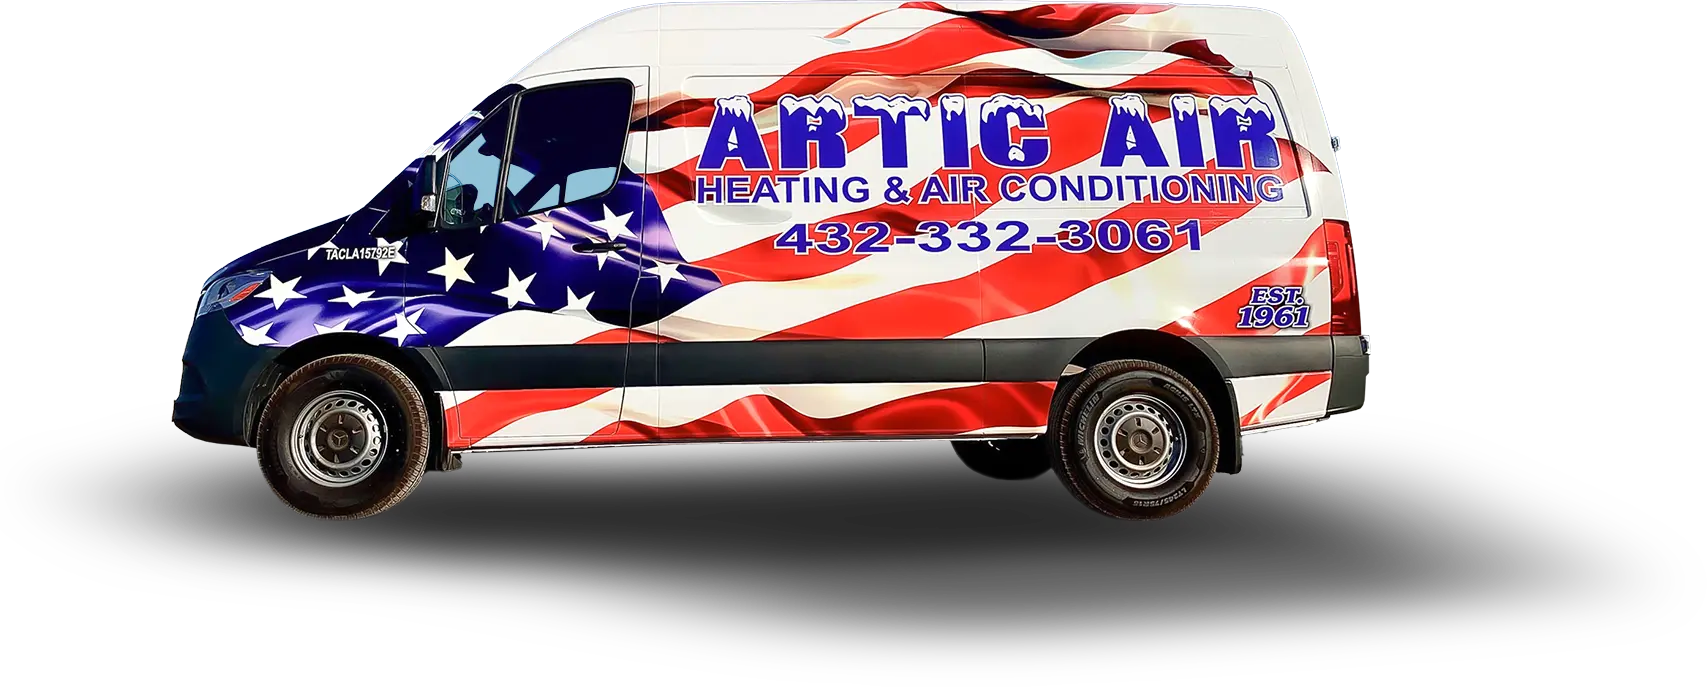 Artic Air service vehicle ready to serve our customers.